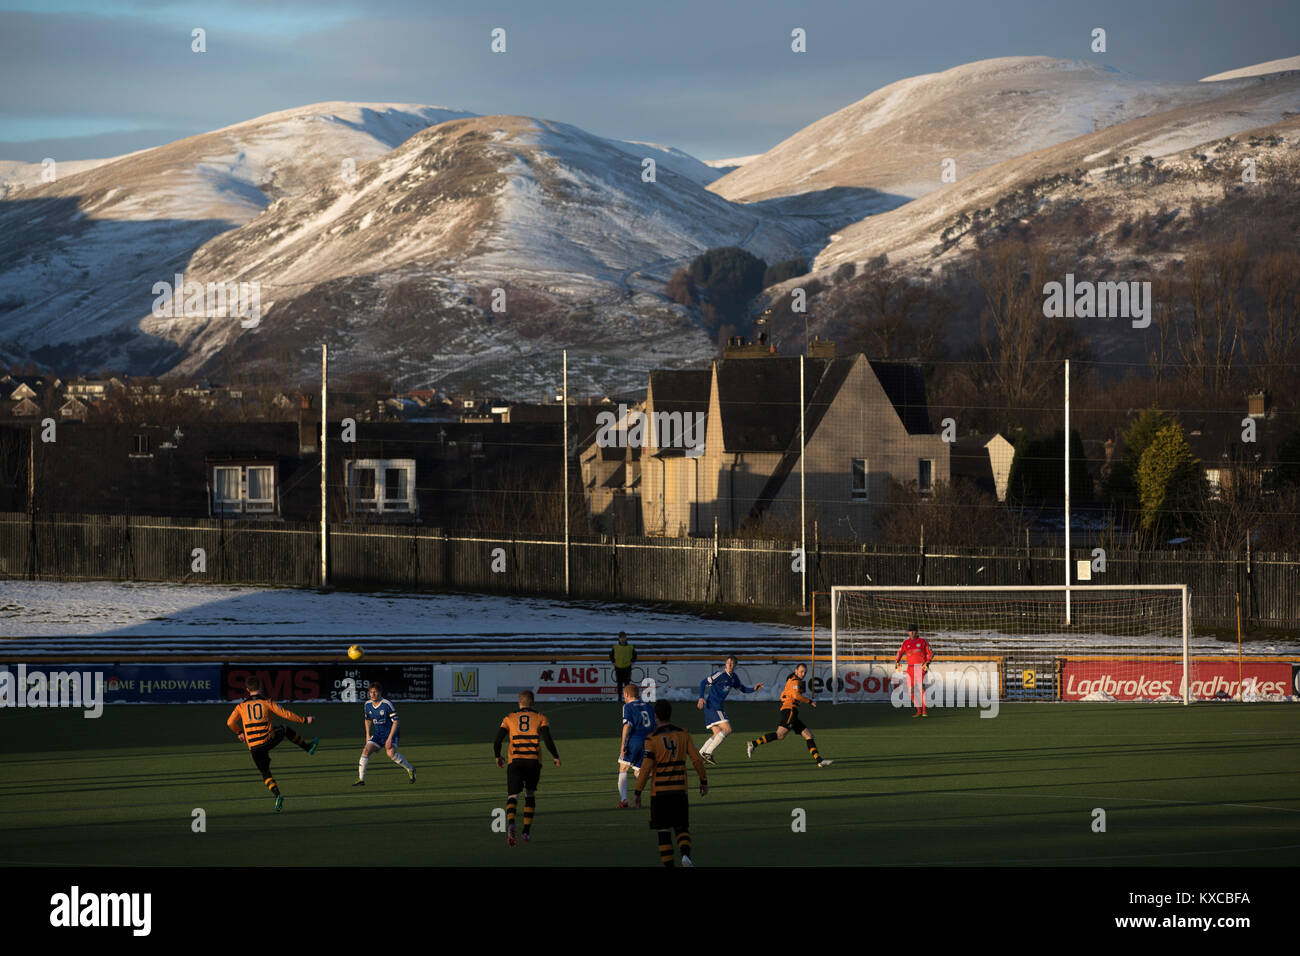 Alloa Athletic take on Peterhead (in blue) in a Scottish League One fixture at Recreation Park, with the Ochil Hills in the background. The club was formed in 1878 as Clackmannan County, changing the name to Alloa Athletic in 1883. The visitors won the match by one goal to nil, watched by a crowd of 504. Stock Photo